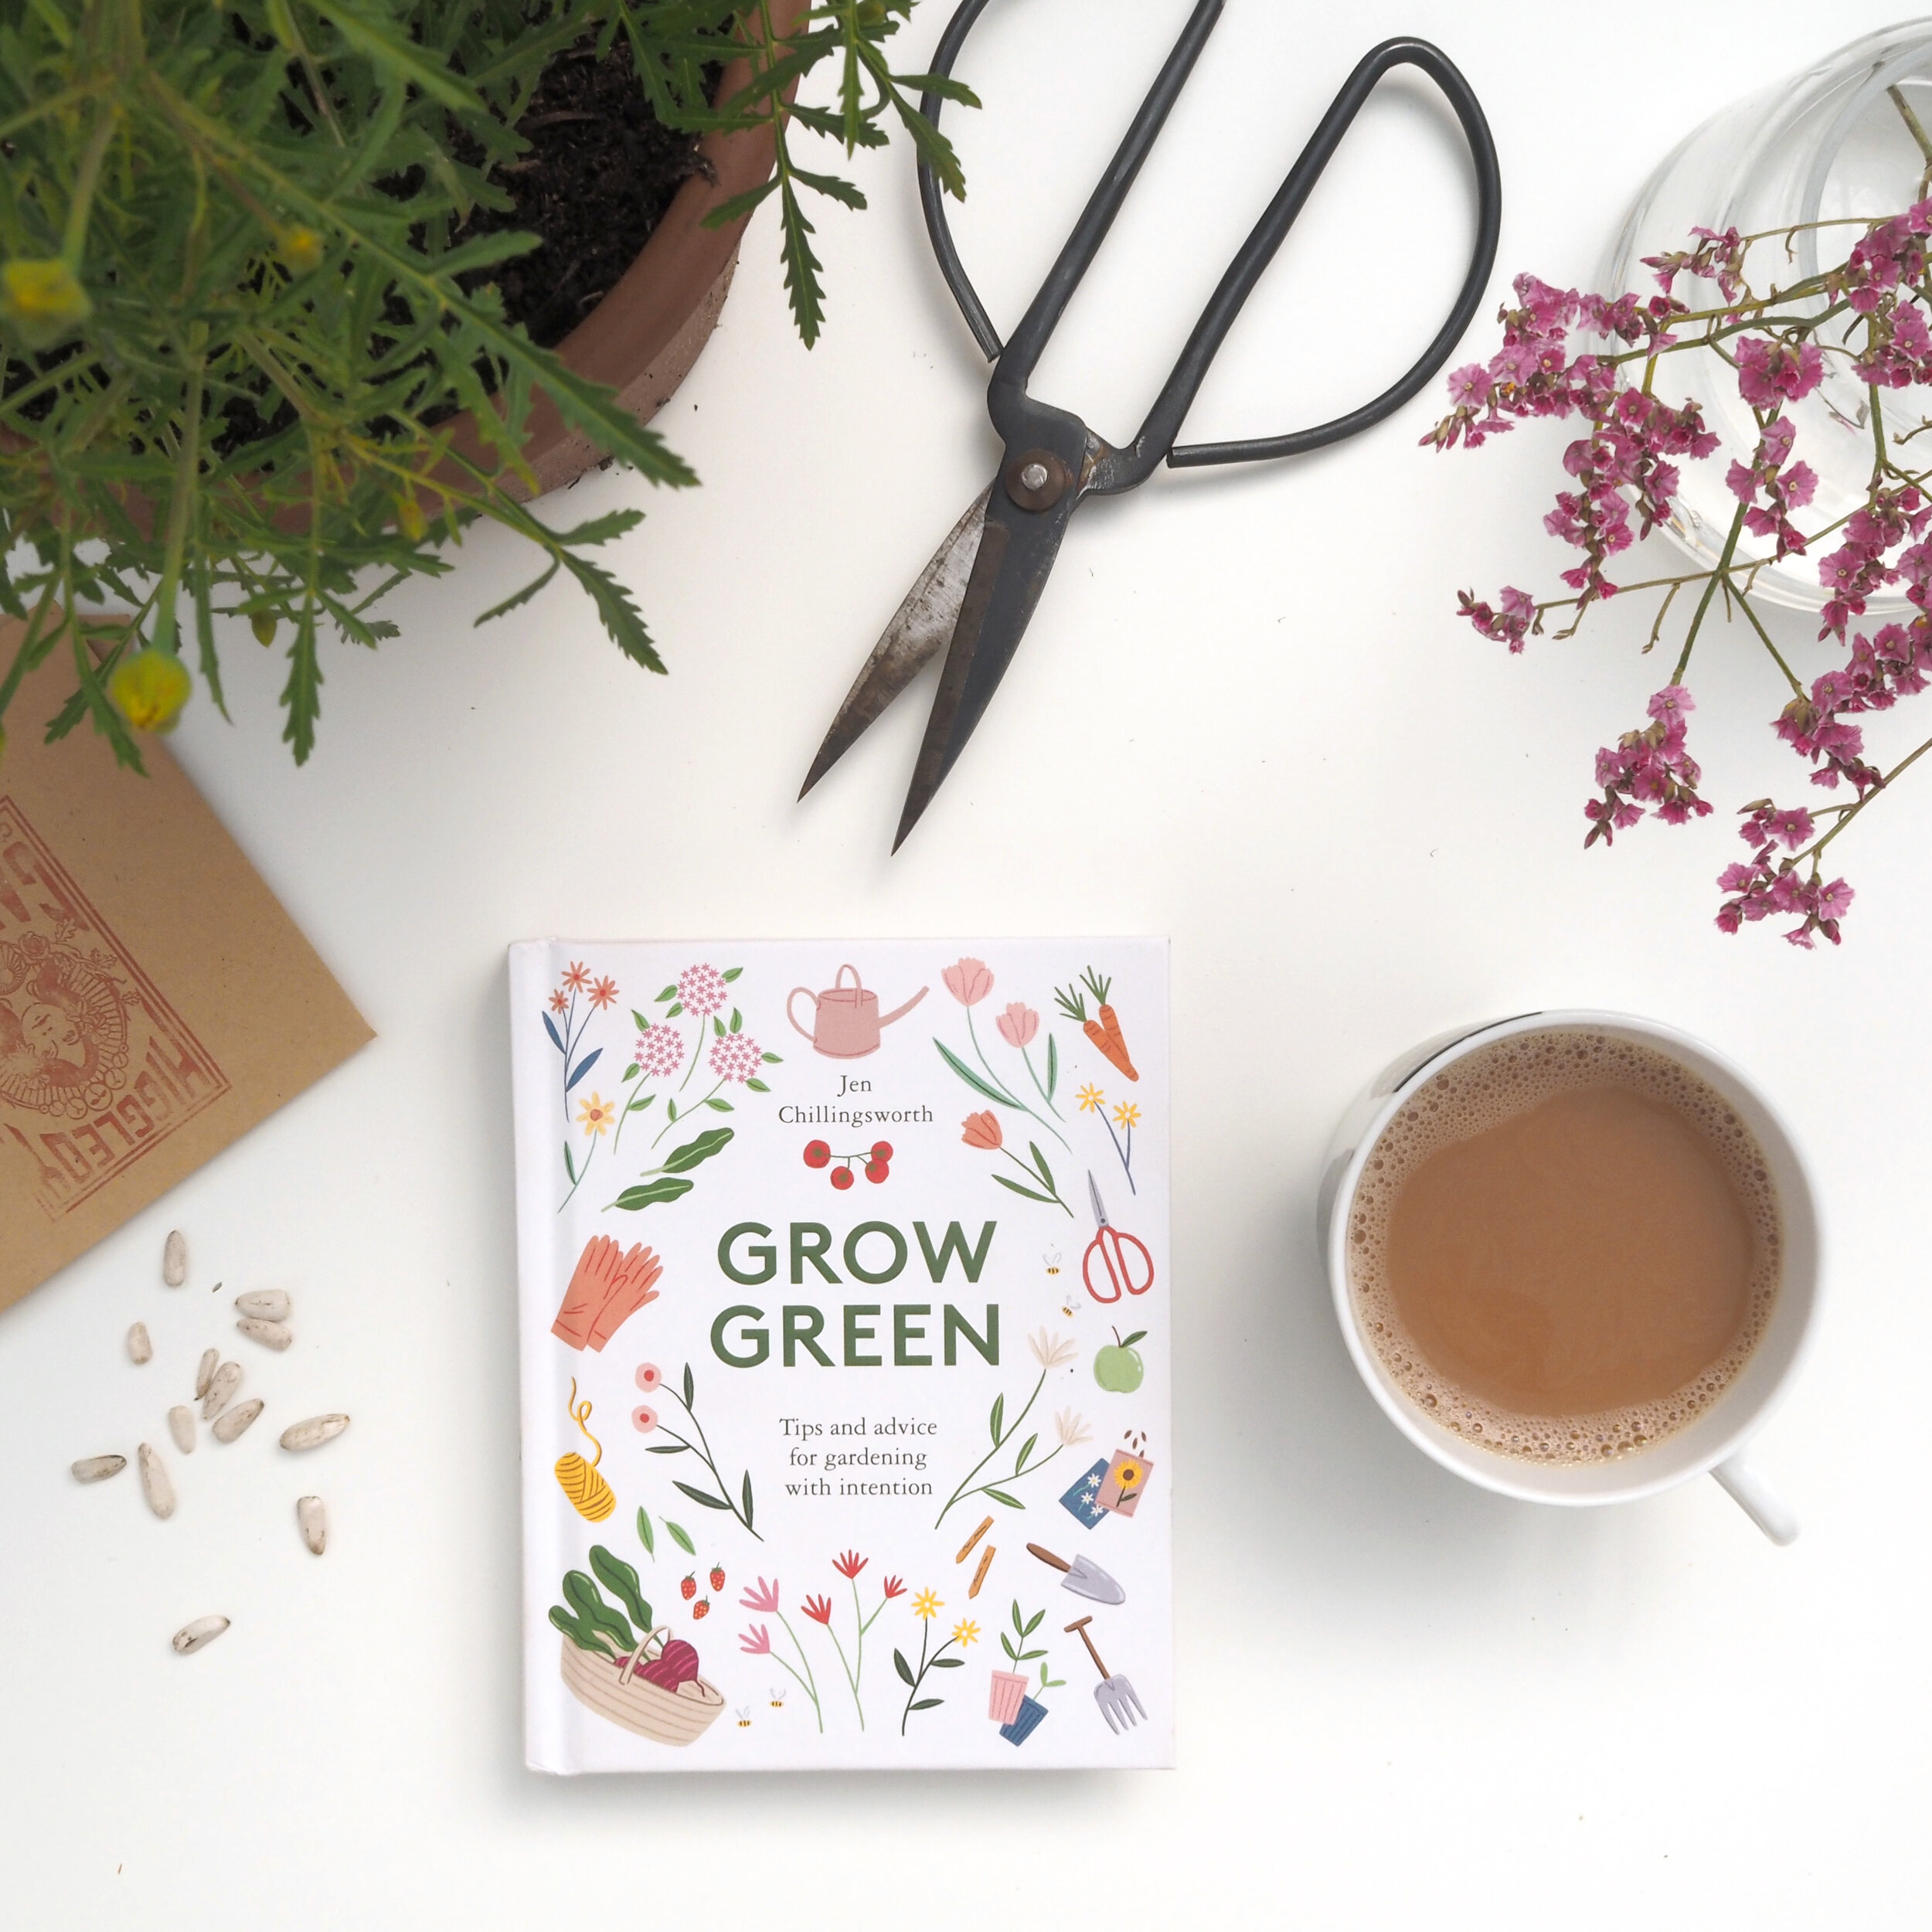 91 Magazine reviews Grow Green by Jen Chillingsworth